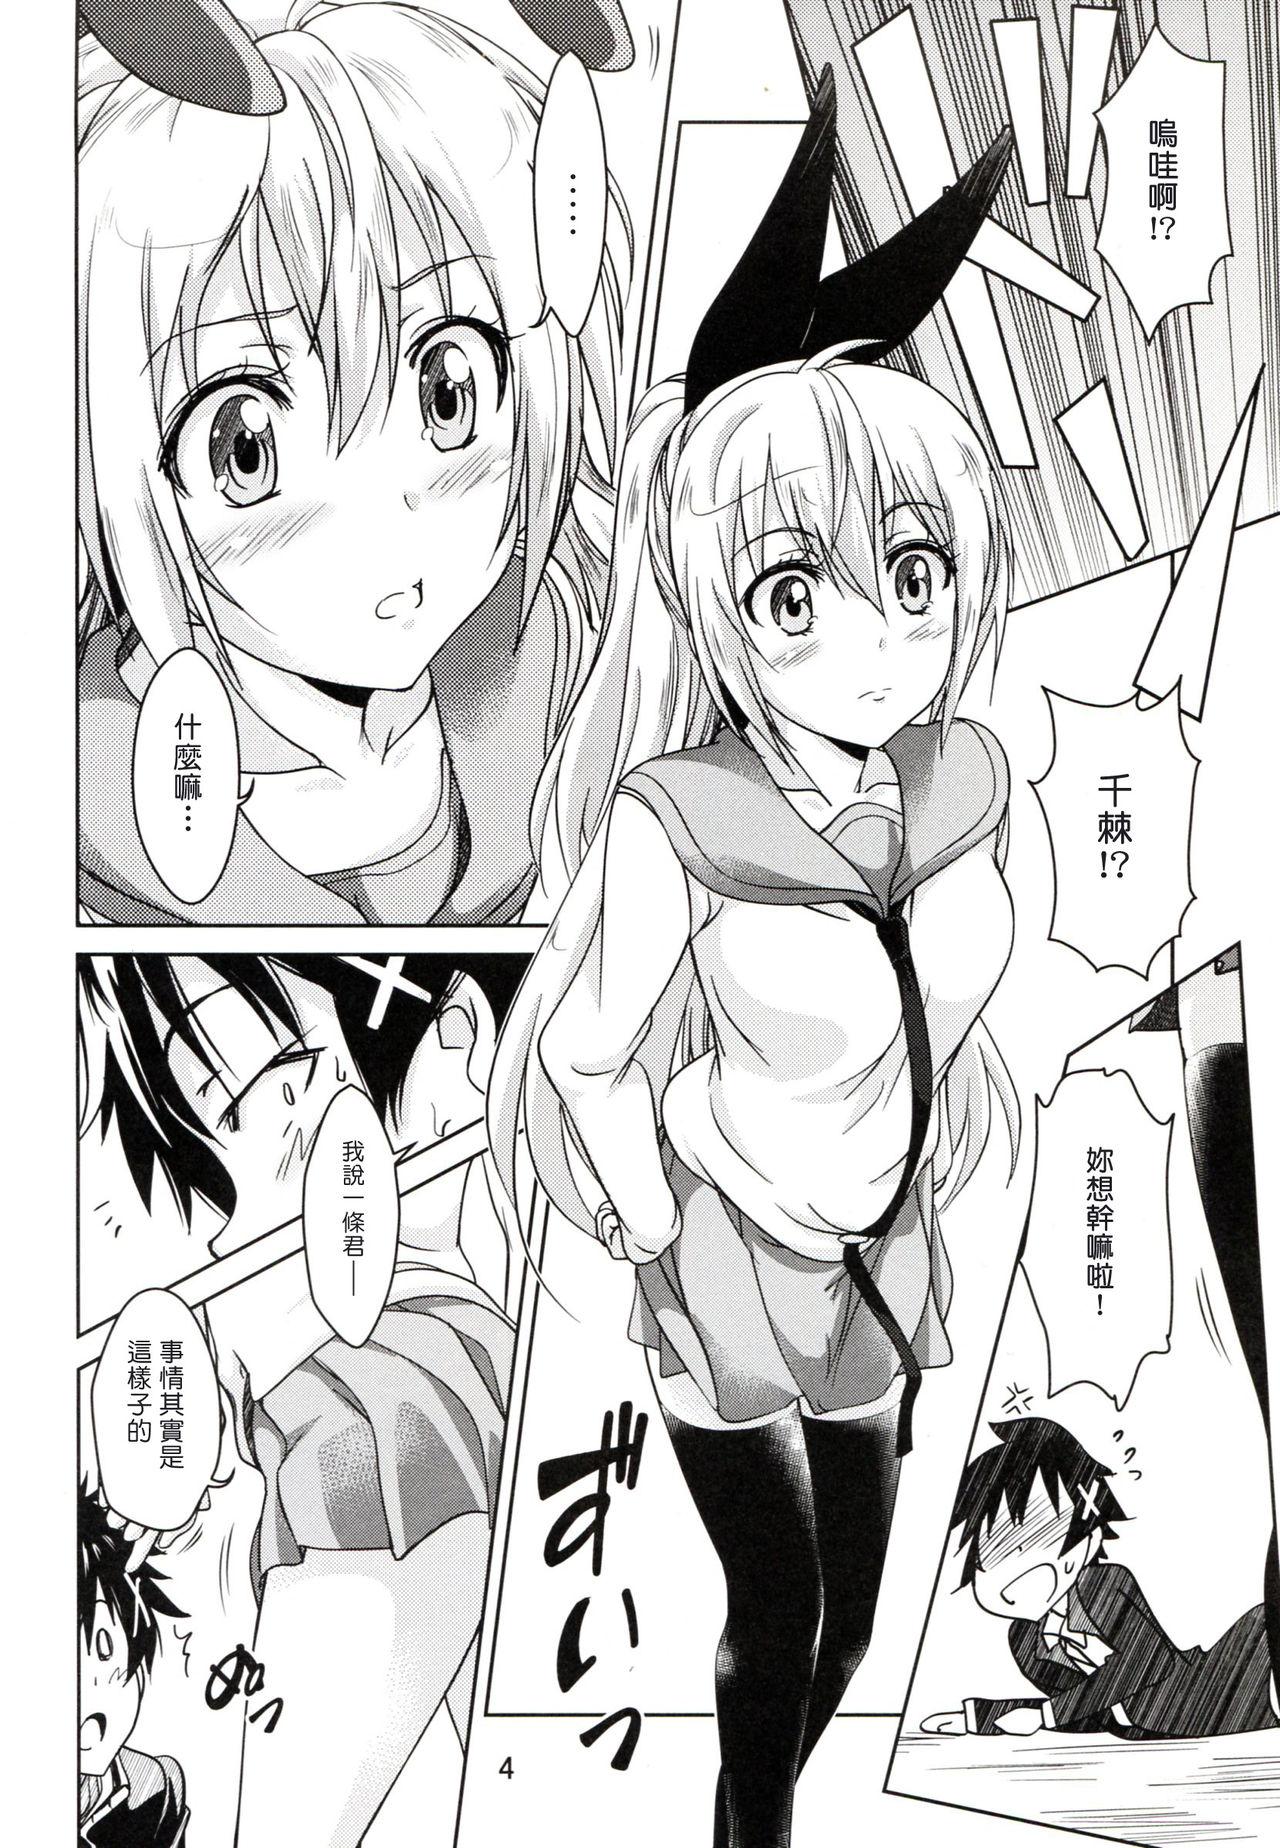 Lesbos CLICK CLICK - Nisekoi Ikillitts - Page 4